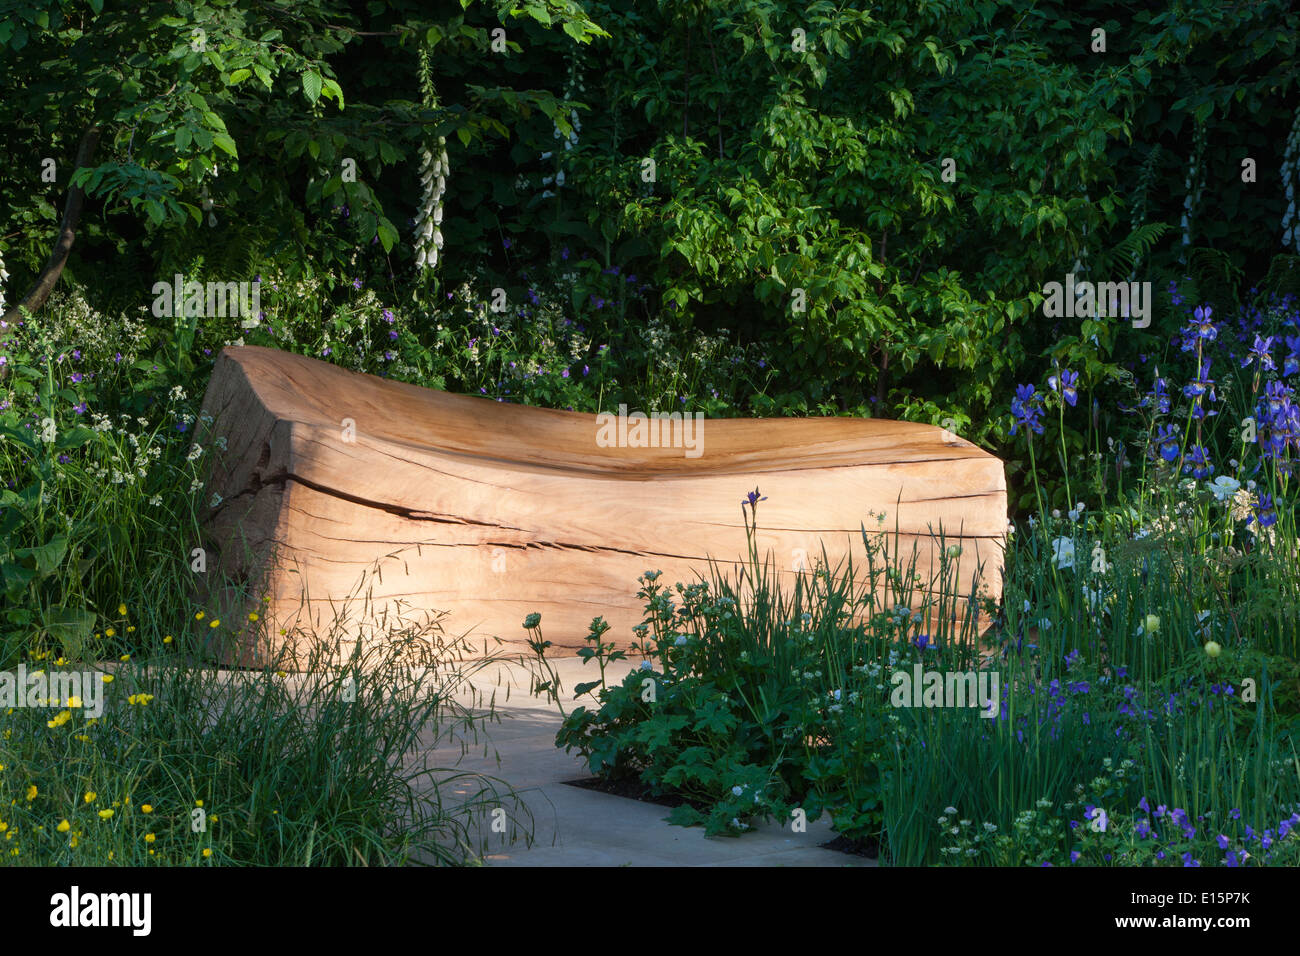 RHS Chelsea flower show 2014 - The Homebase Garden - Time to Reflect - in association with the Alzheimer's Society -Designer Ada Stock Photo